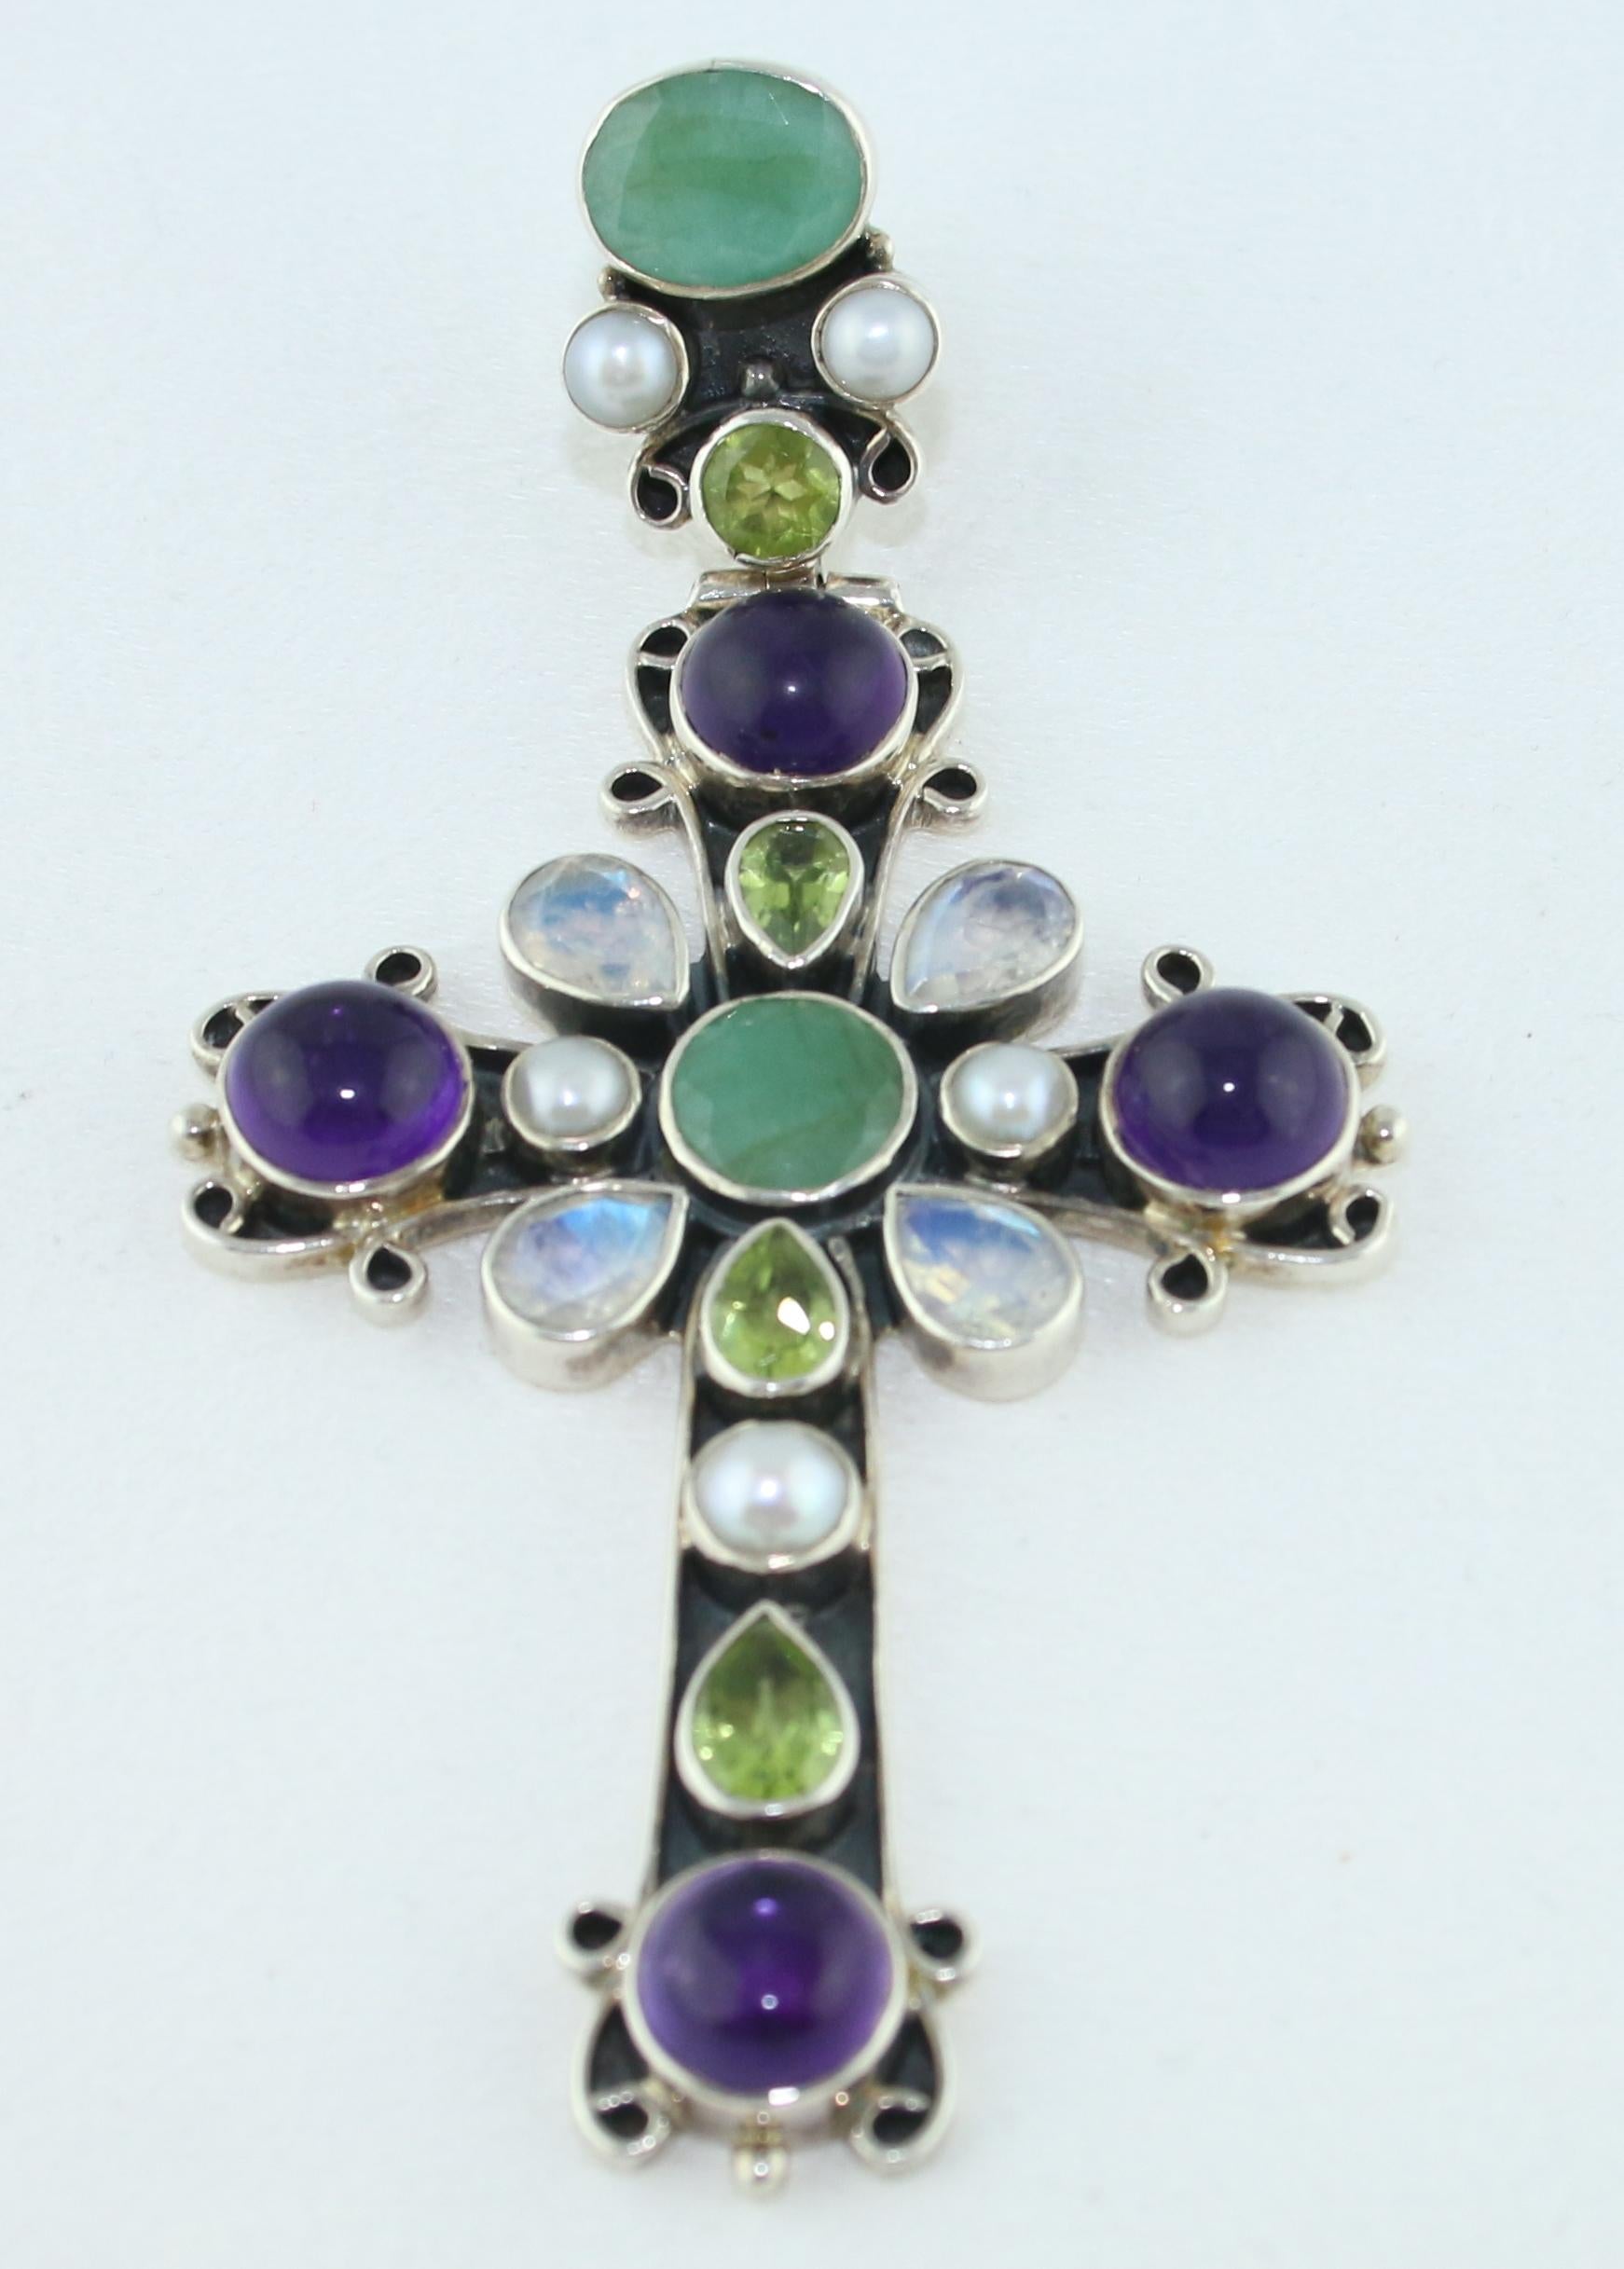 Beautiful Ornate Cross Pendant
The pendant is a Sterling Silver 925
There is Amethyst, Moonstone, Pearl, Peridot, Jade
The Cross measures 3